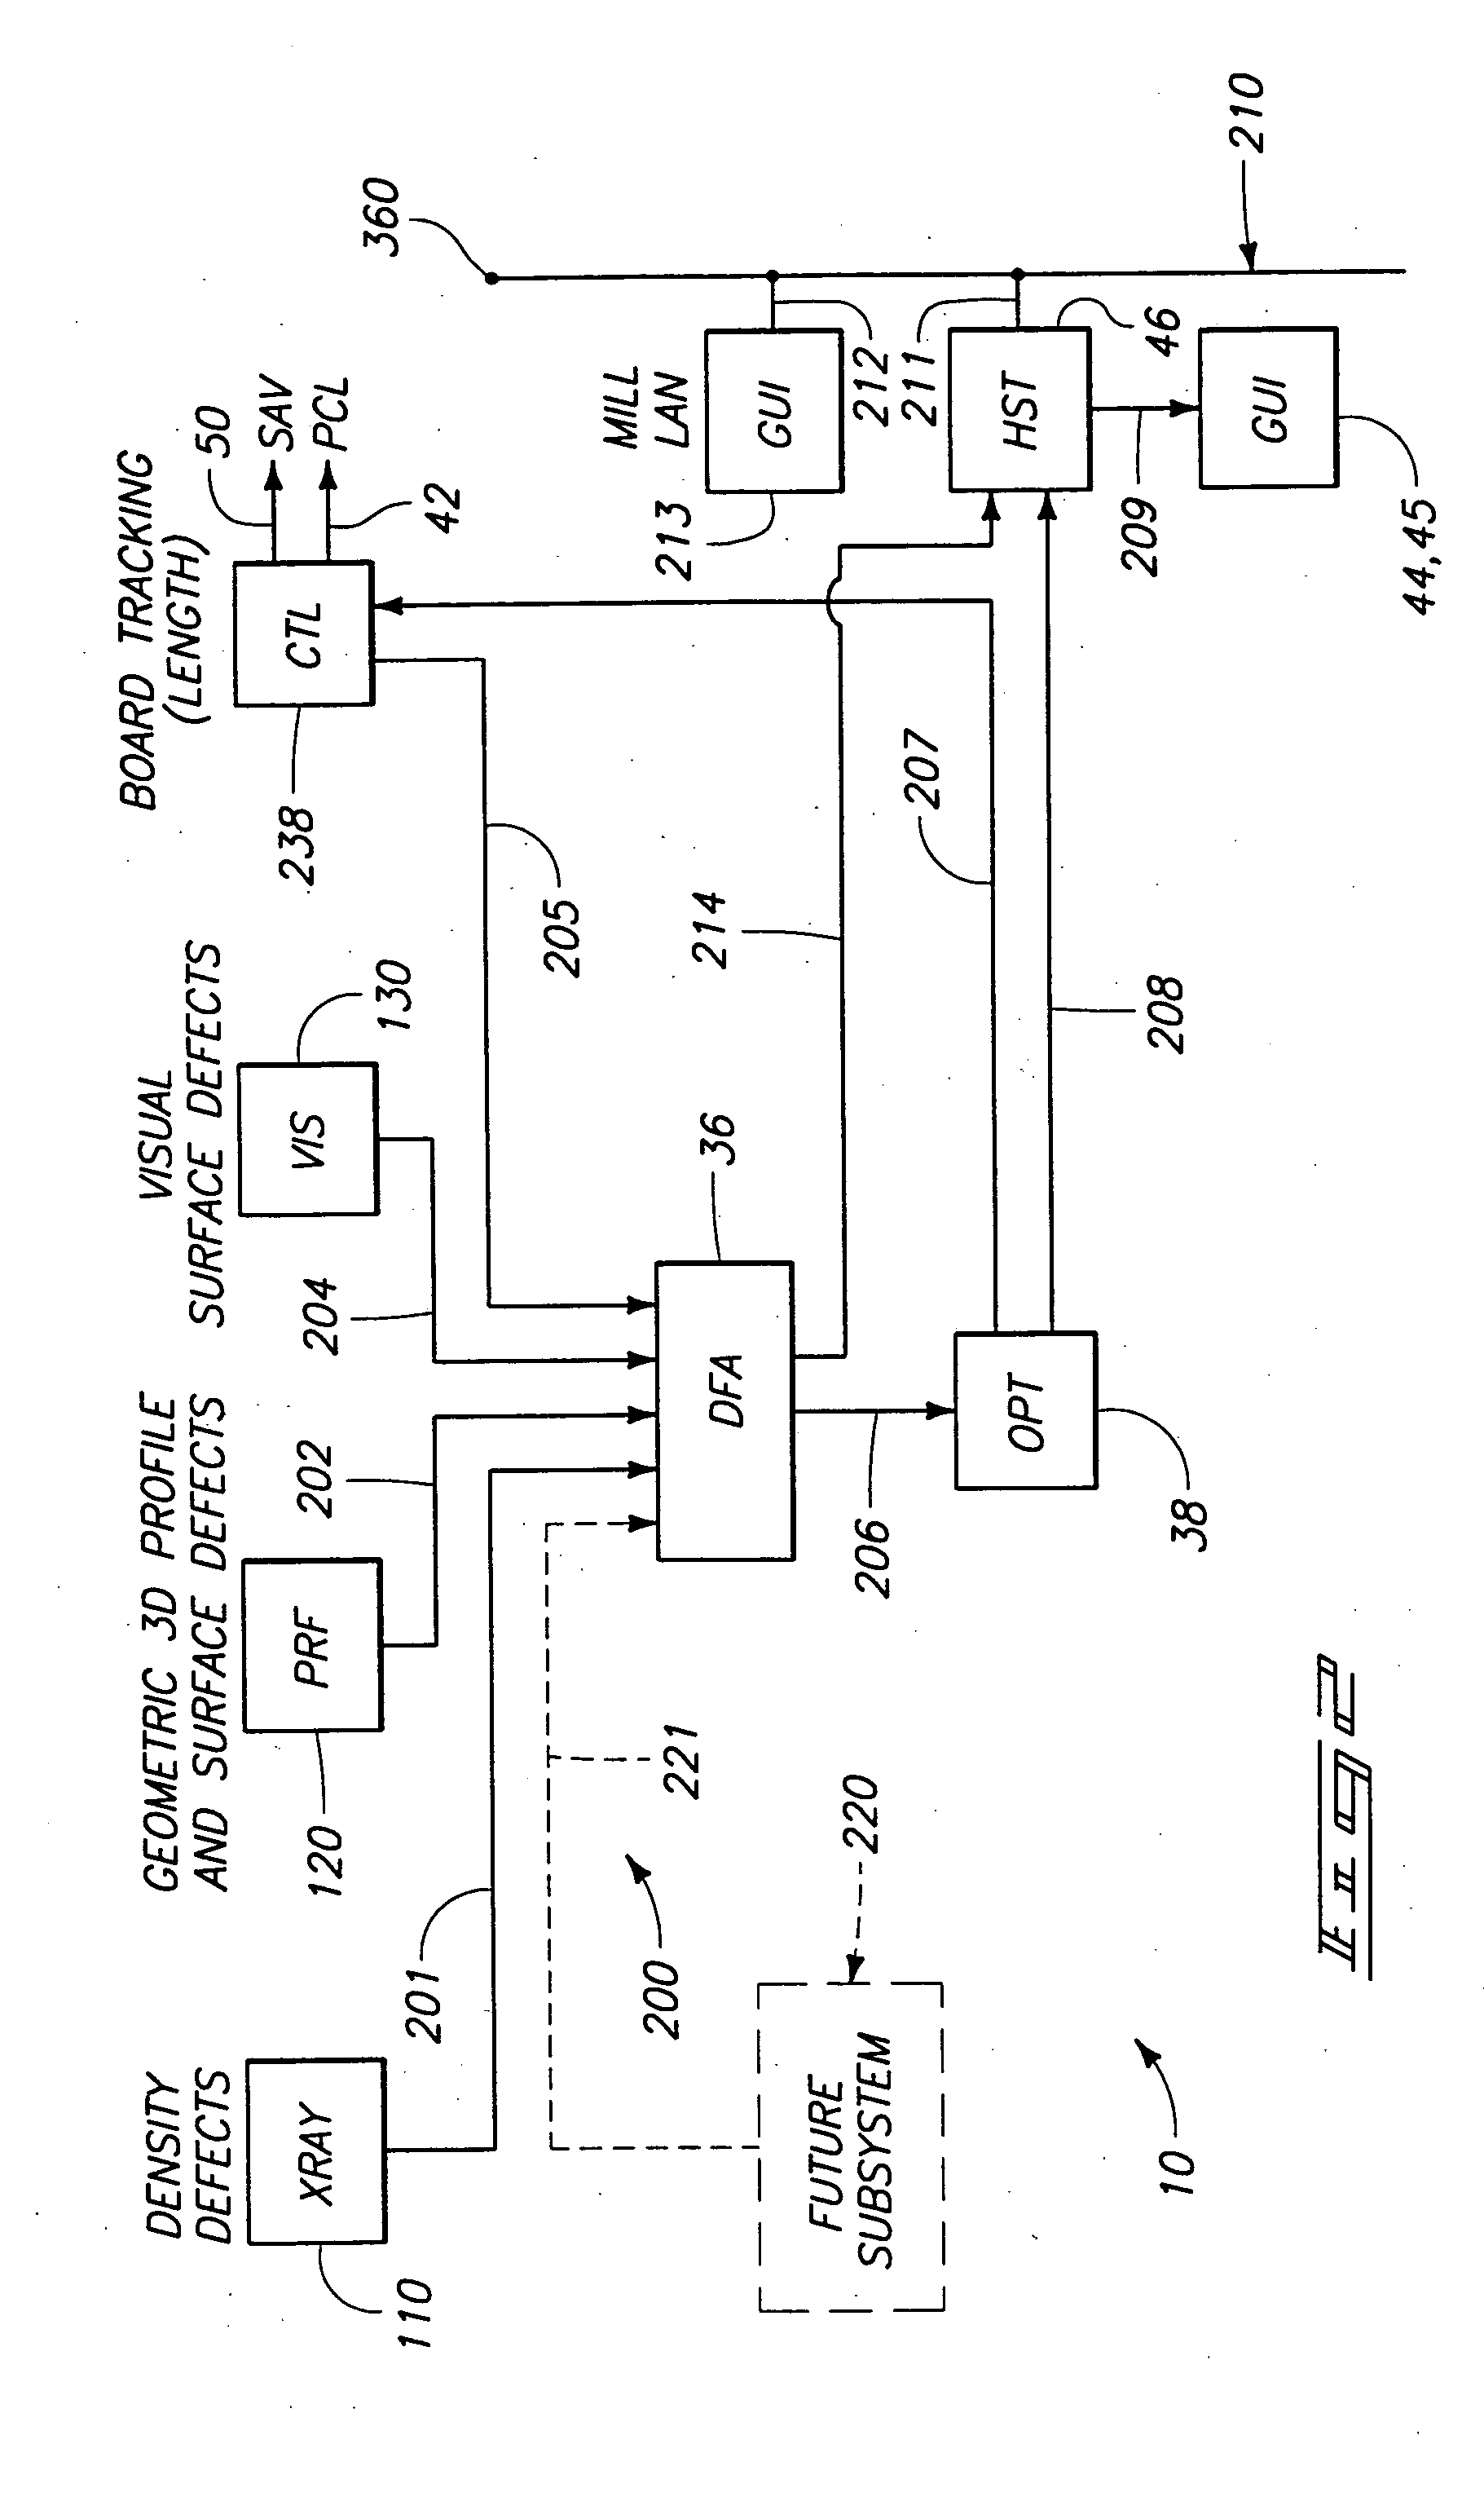 Method and apparatus for improved inspection classification of attributes of a workpiece